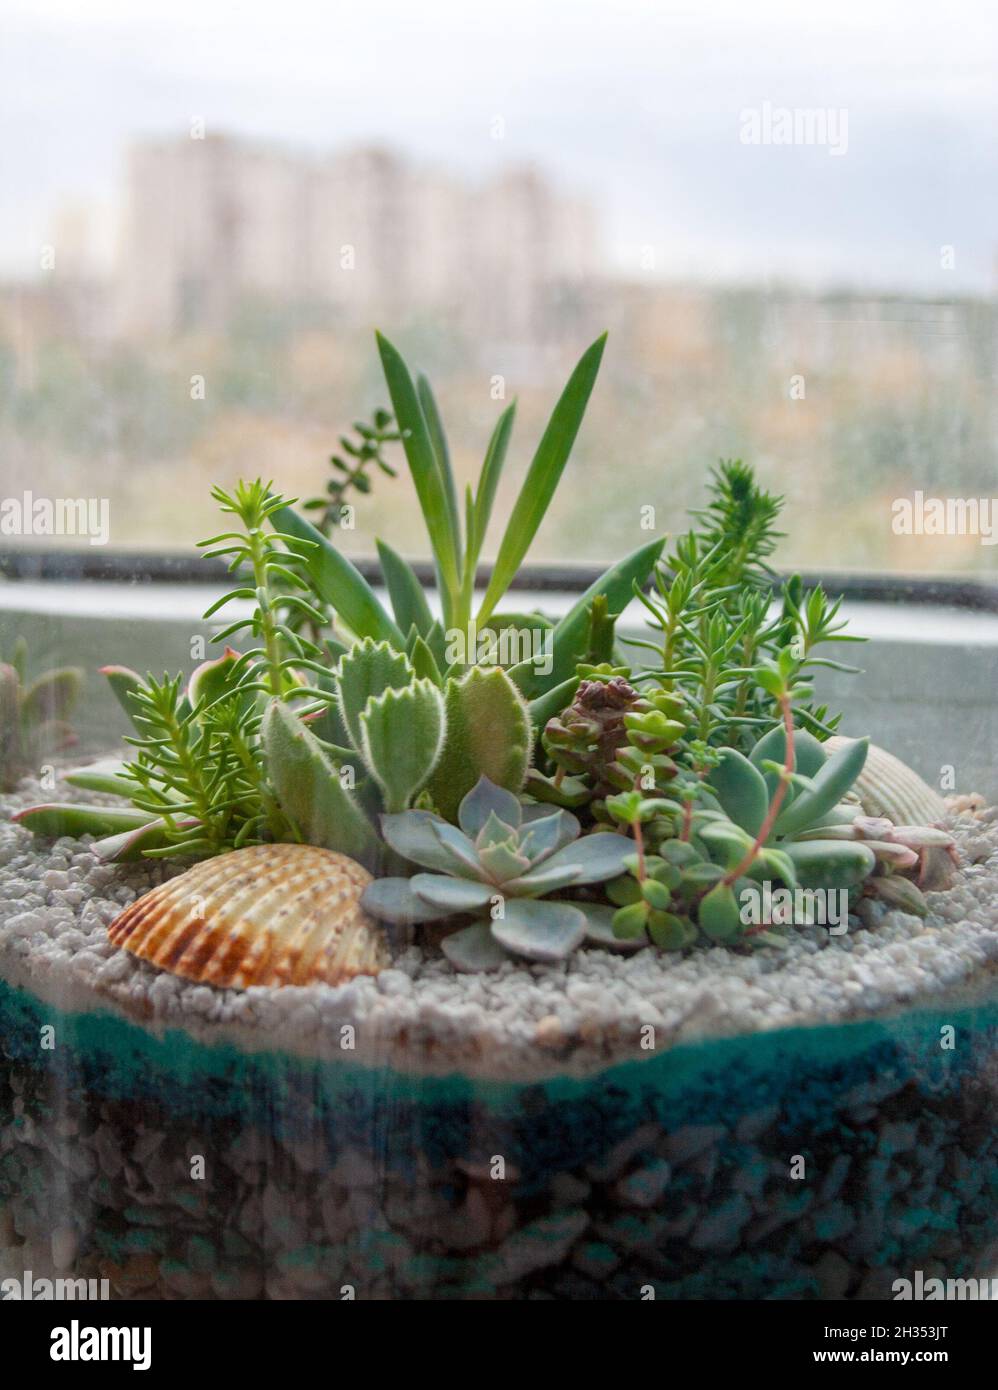 Succulent plants composition in glass container near window with urban silhouette on the background Stock Photo